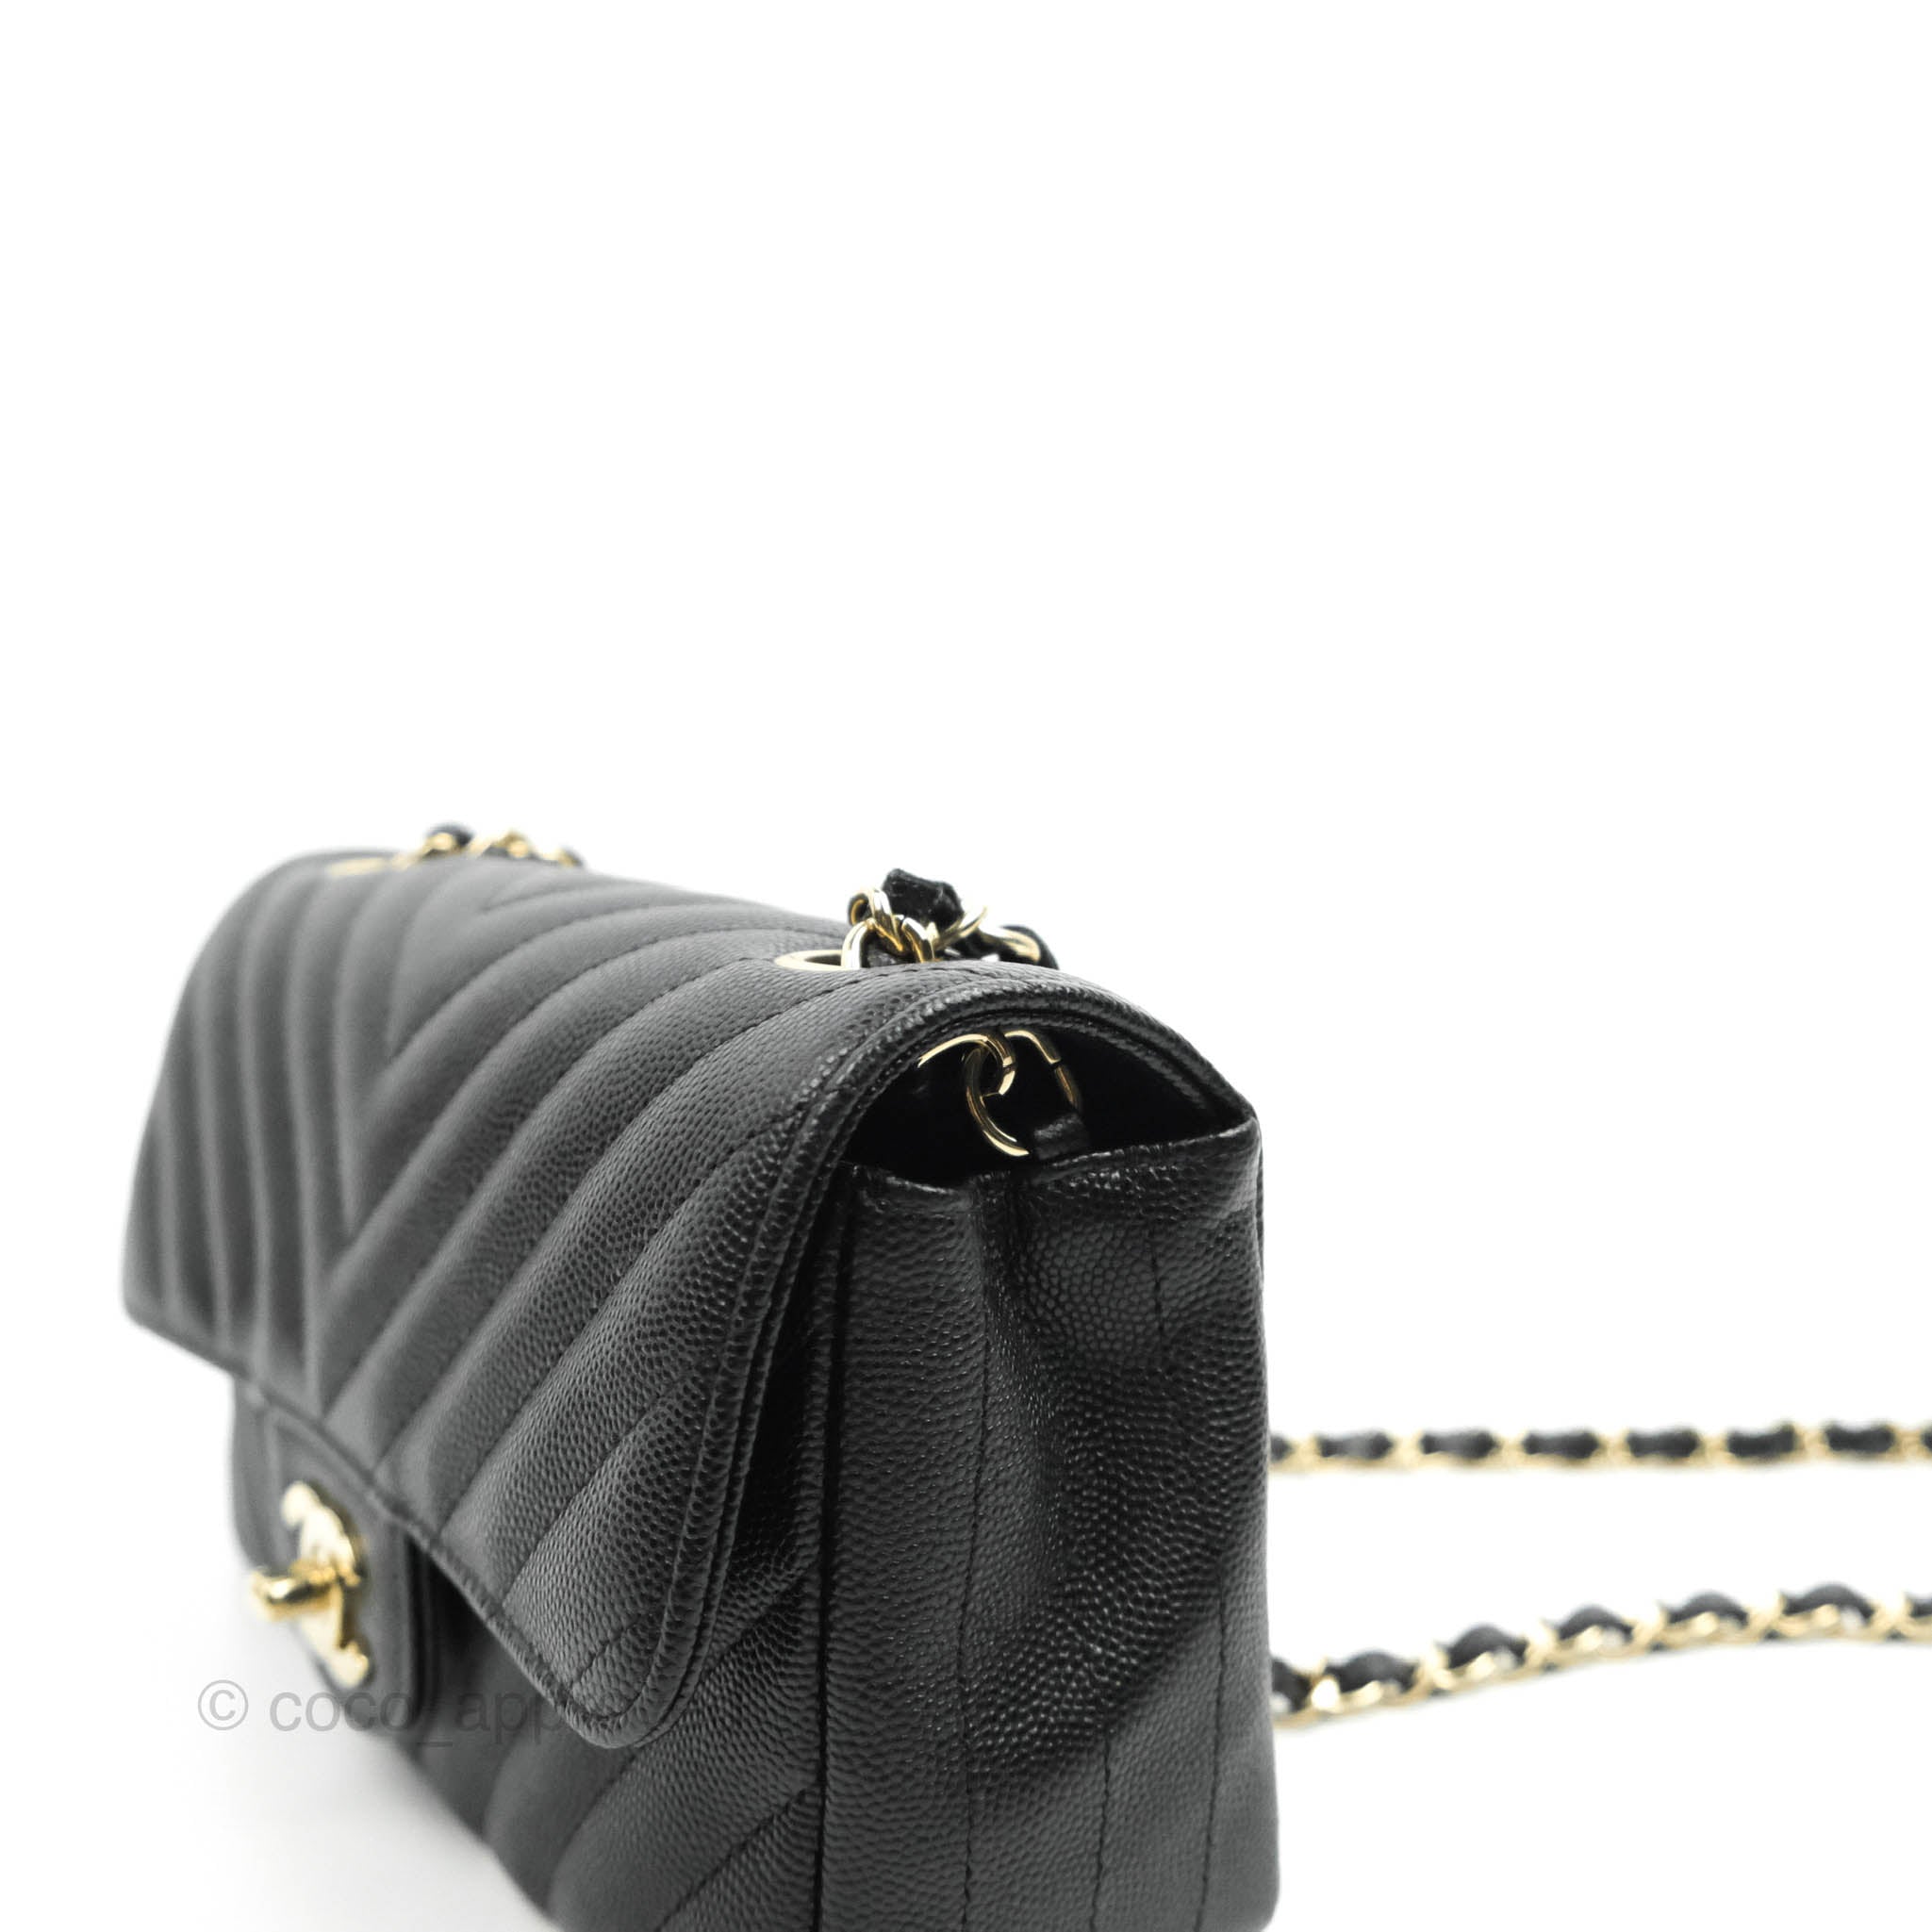 chanel lambskin quilted bag black